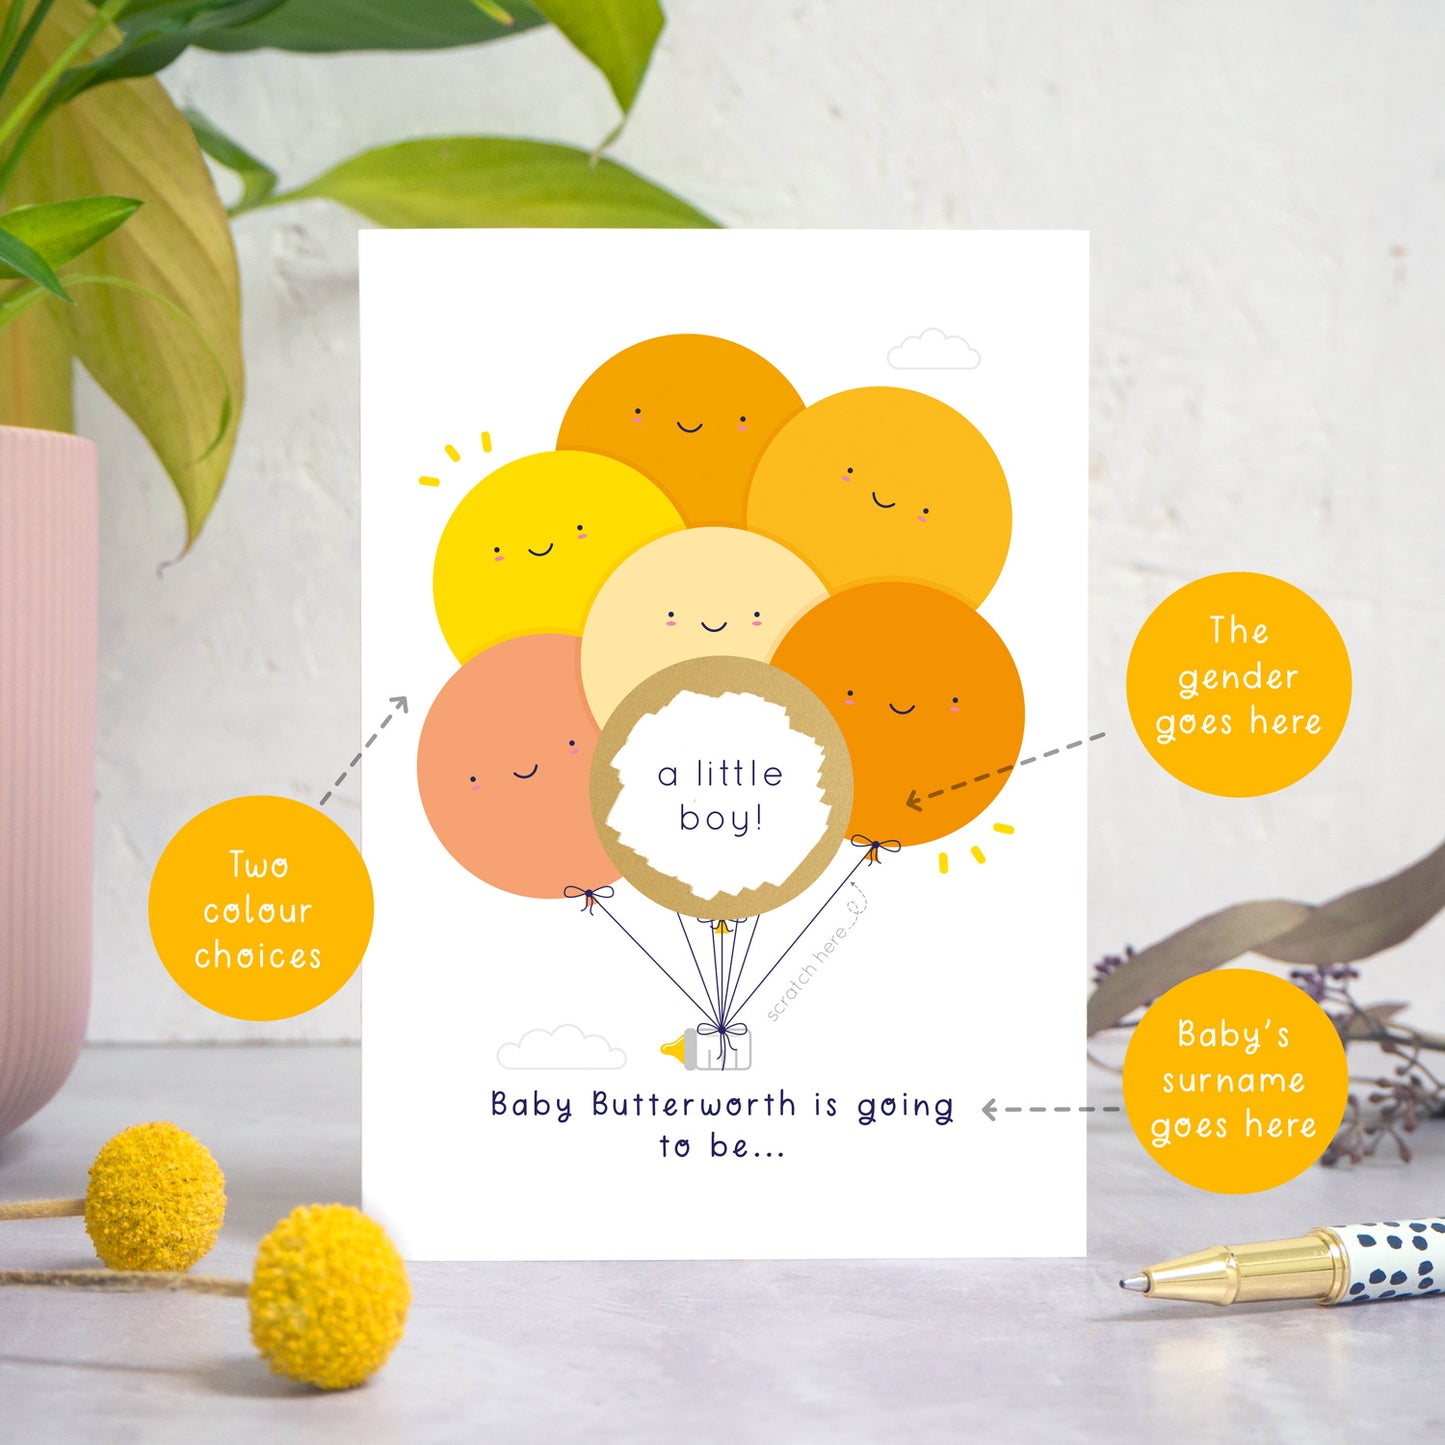 A ‘gender reveal’ scratch card photographed on a white and grey background with a plant on the left and foliage and a pen on the right. This image demonstrates the custom options of the card, eg. the colour of the balloons, the gender and the baby’s surname.